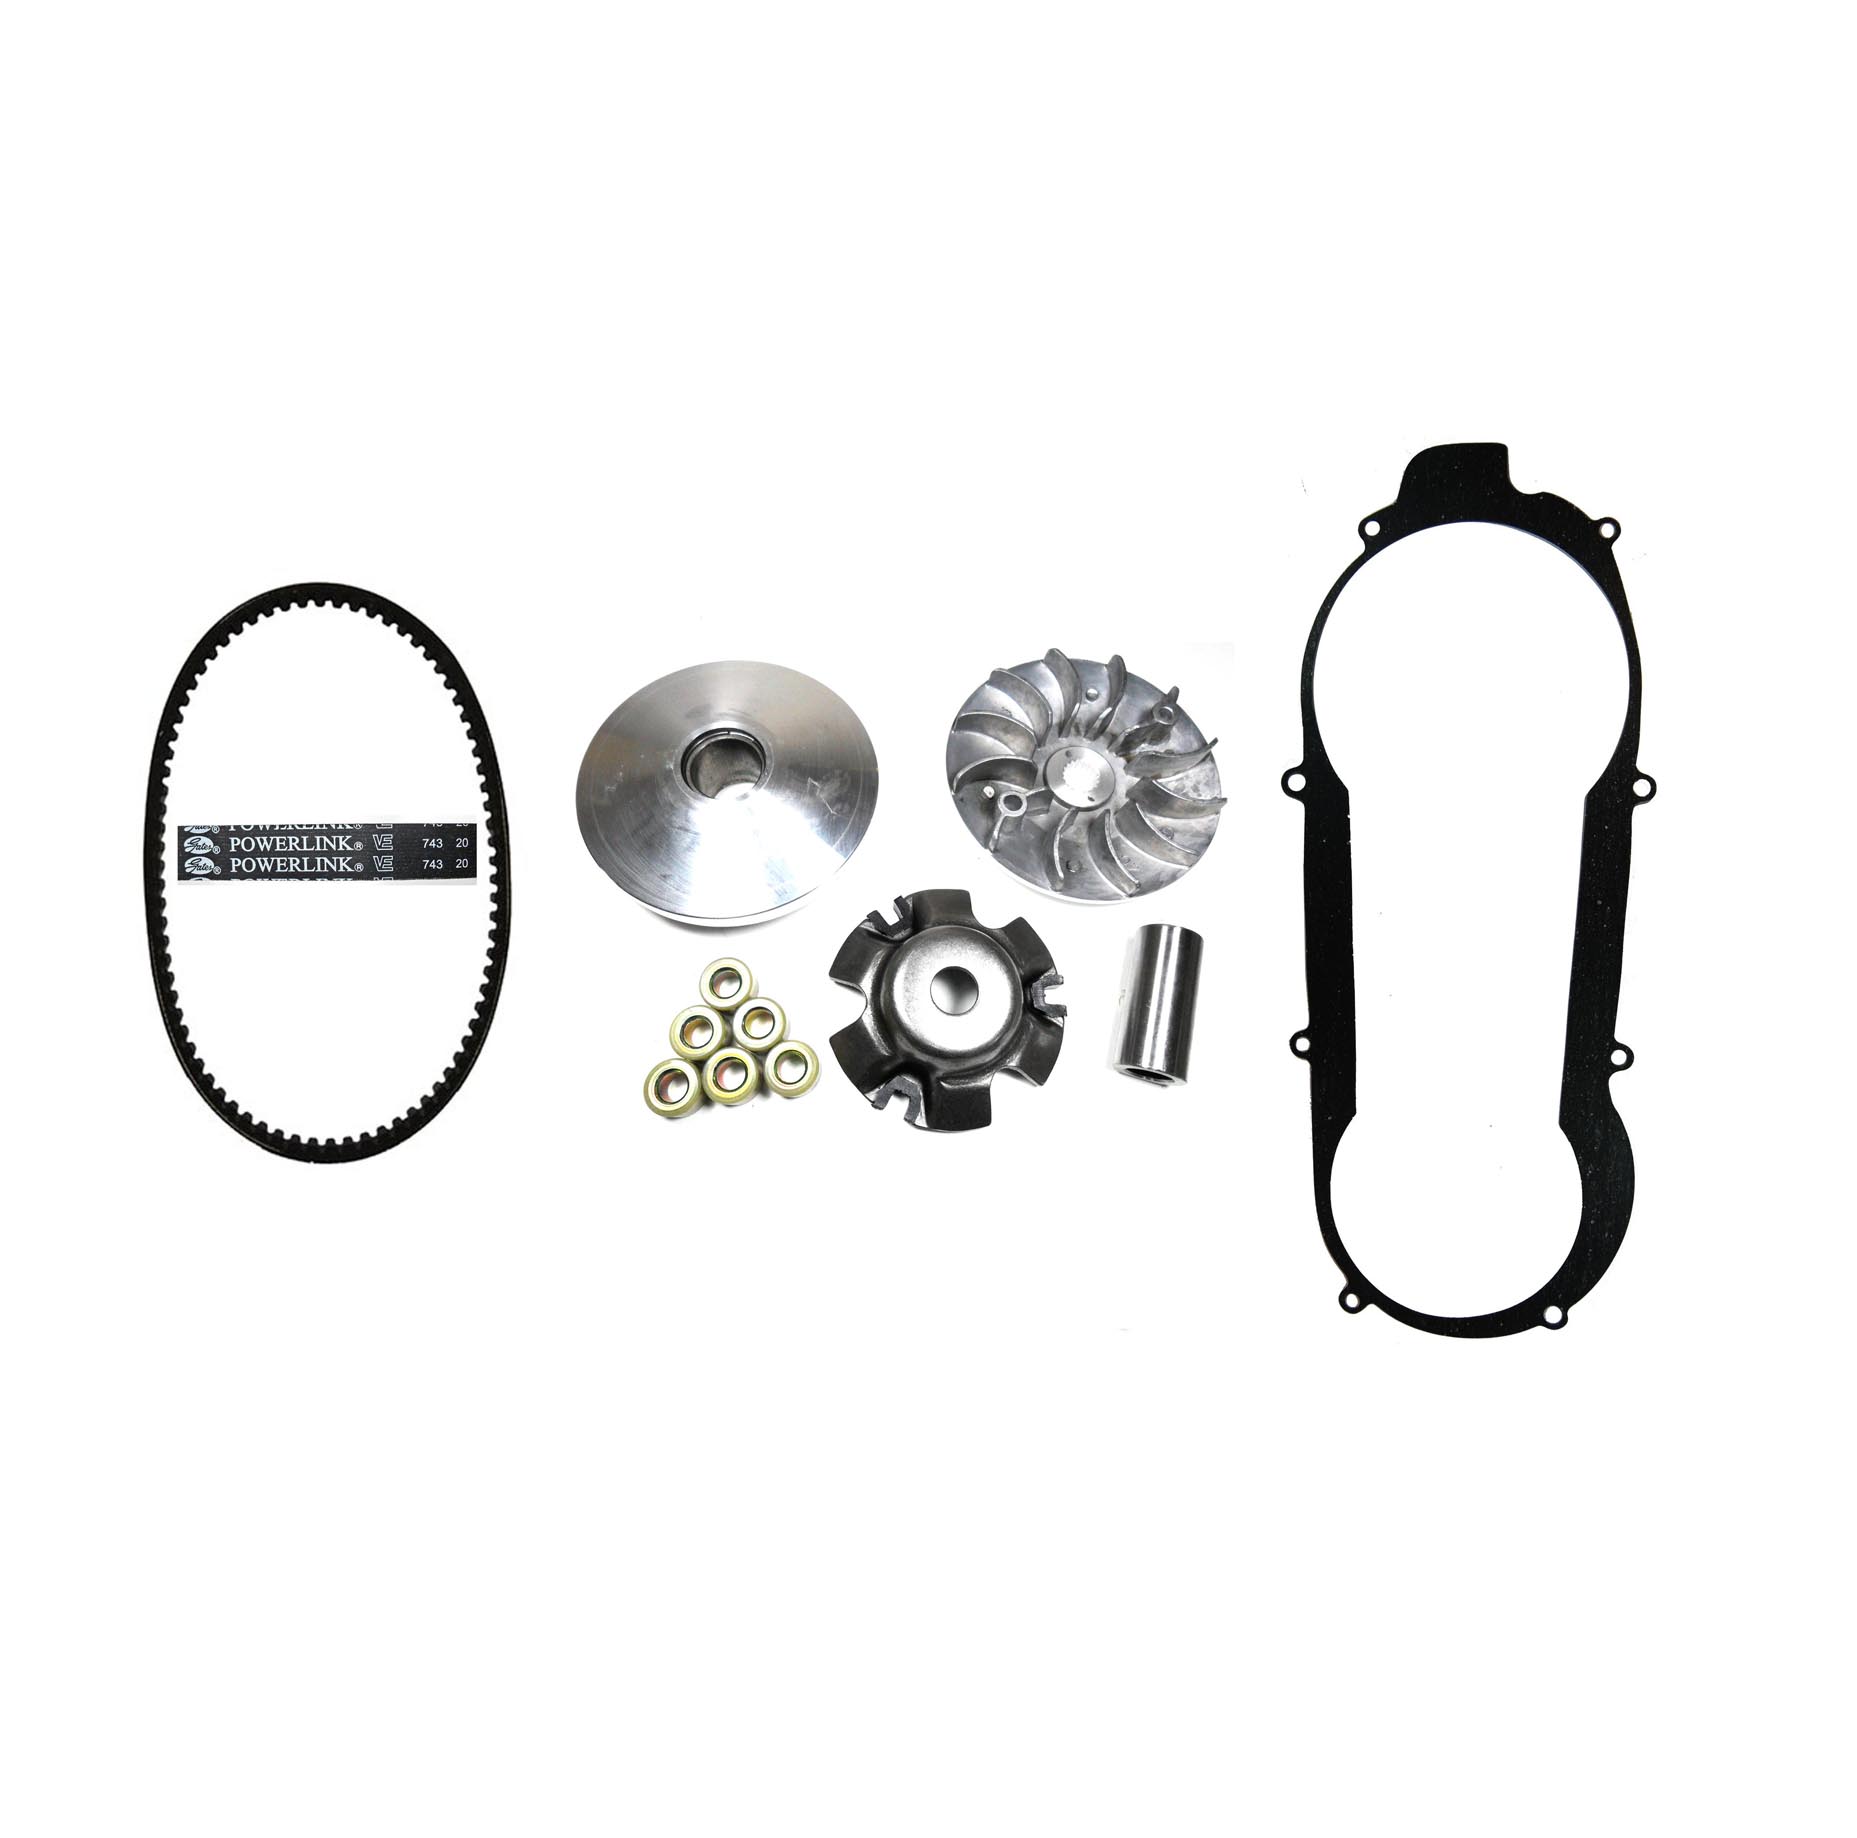 GY6-150 Front Clutch Variator & Powerlink Belt Kit (Short Case) For use on units with the 743x20x30 Belt - Click Image to Close